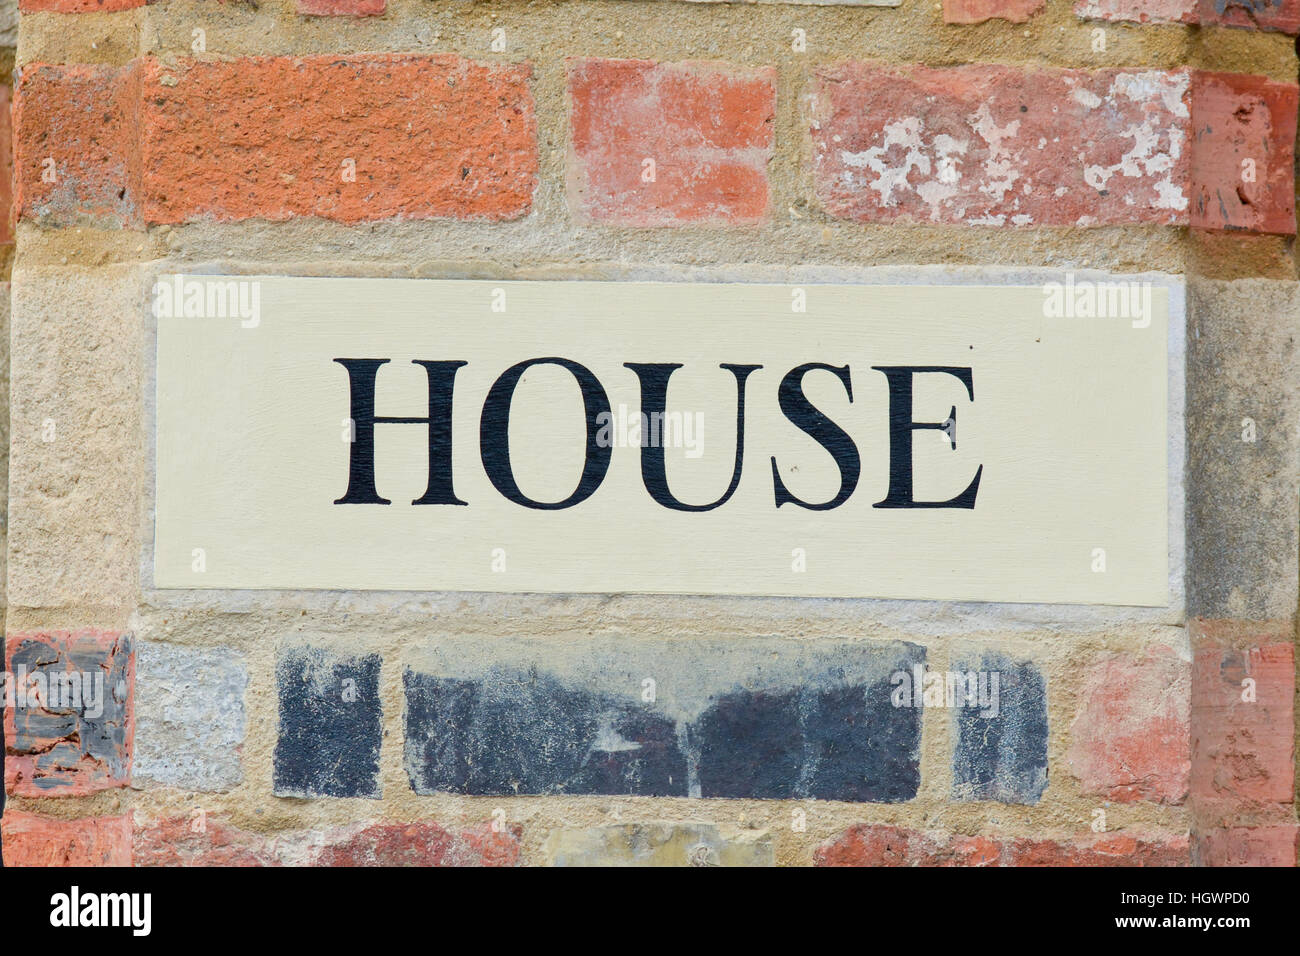 House sign painted on brick as part of wall Stock Photo